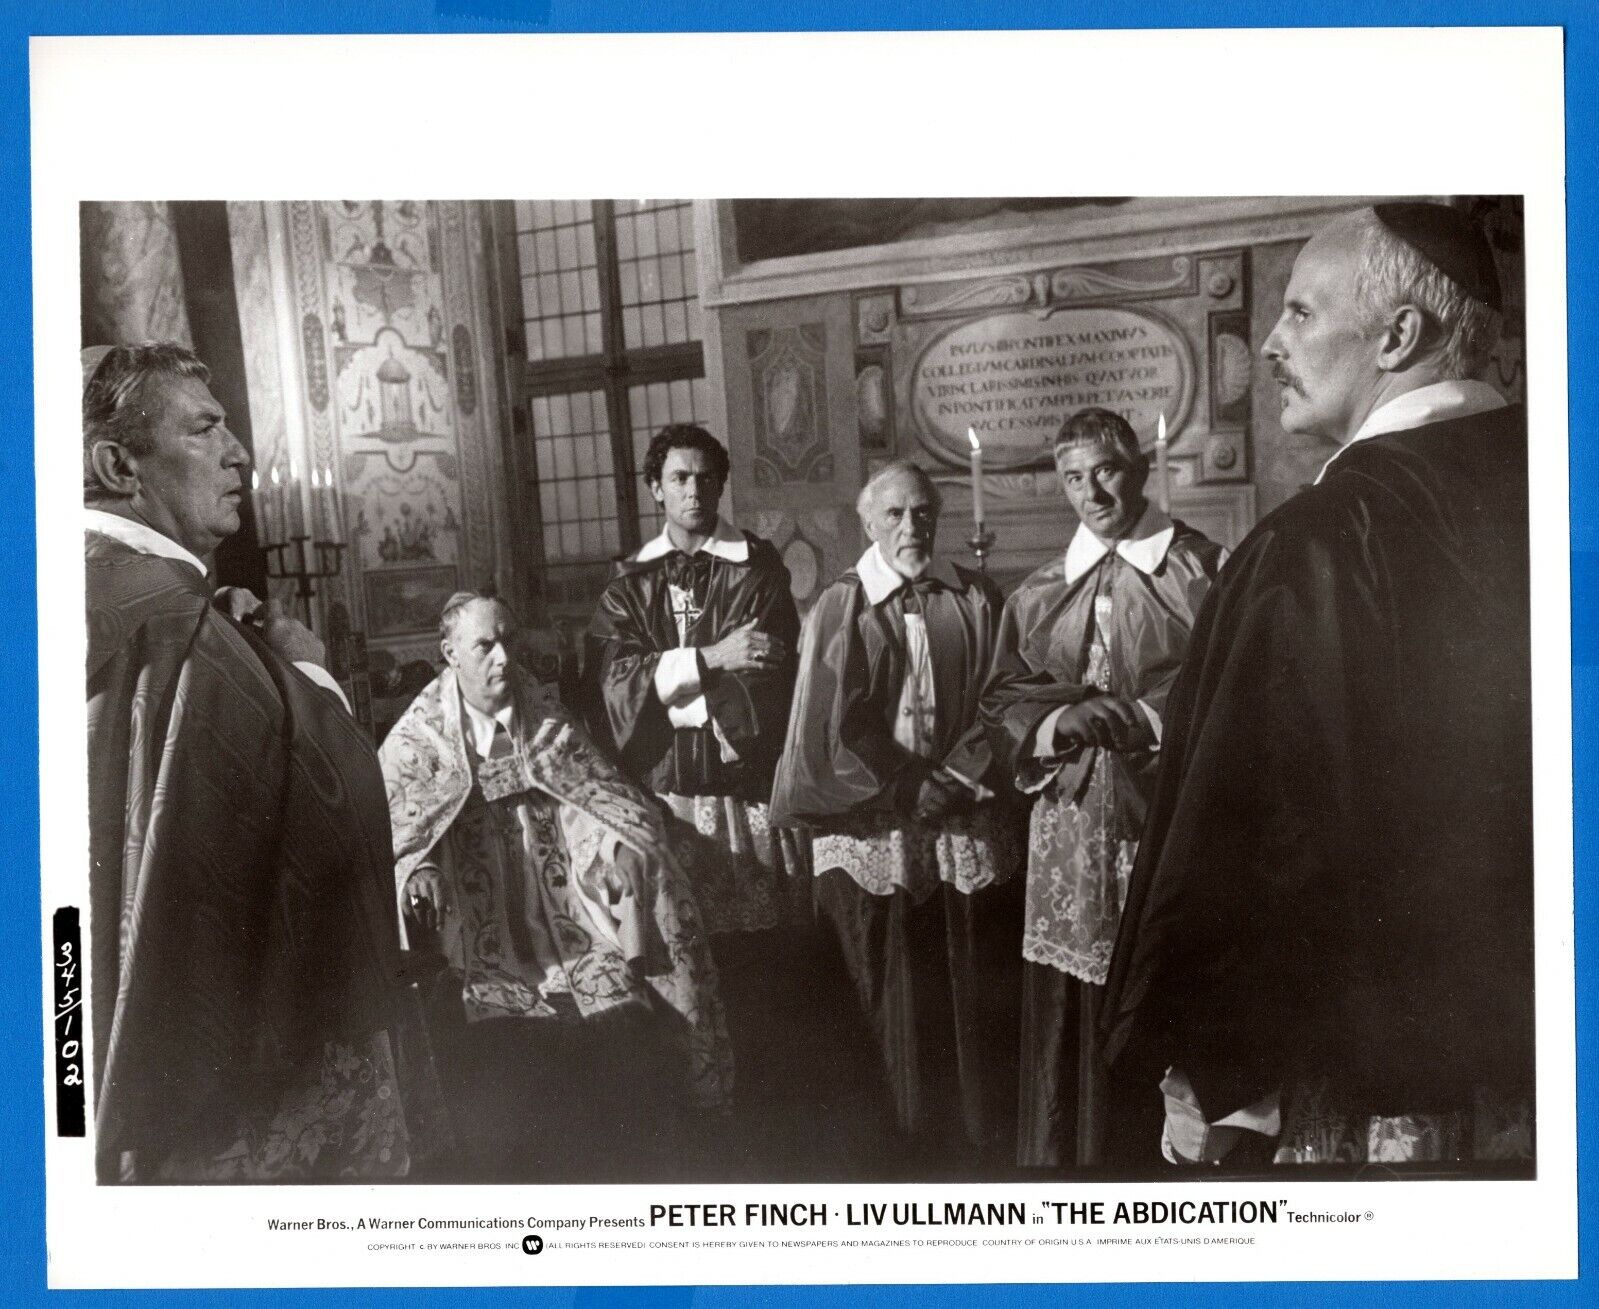 LIV ULLMANN PETER FINCH 8x10 Vintage Promo Photo Poster painting THE ABDICATION Movie 1974